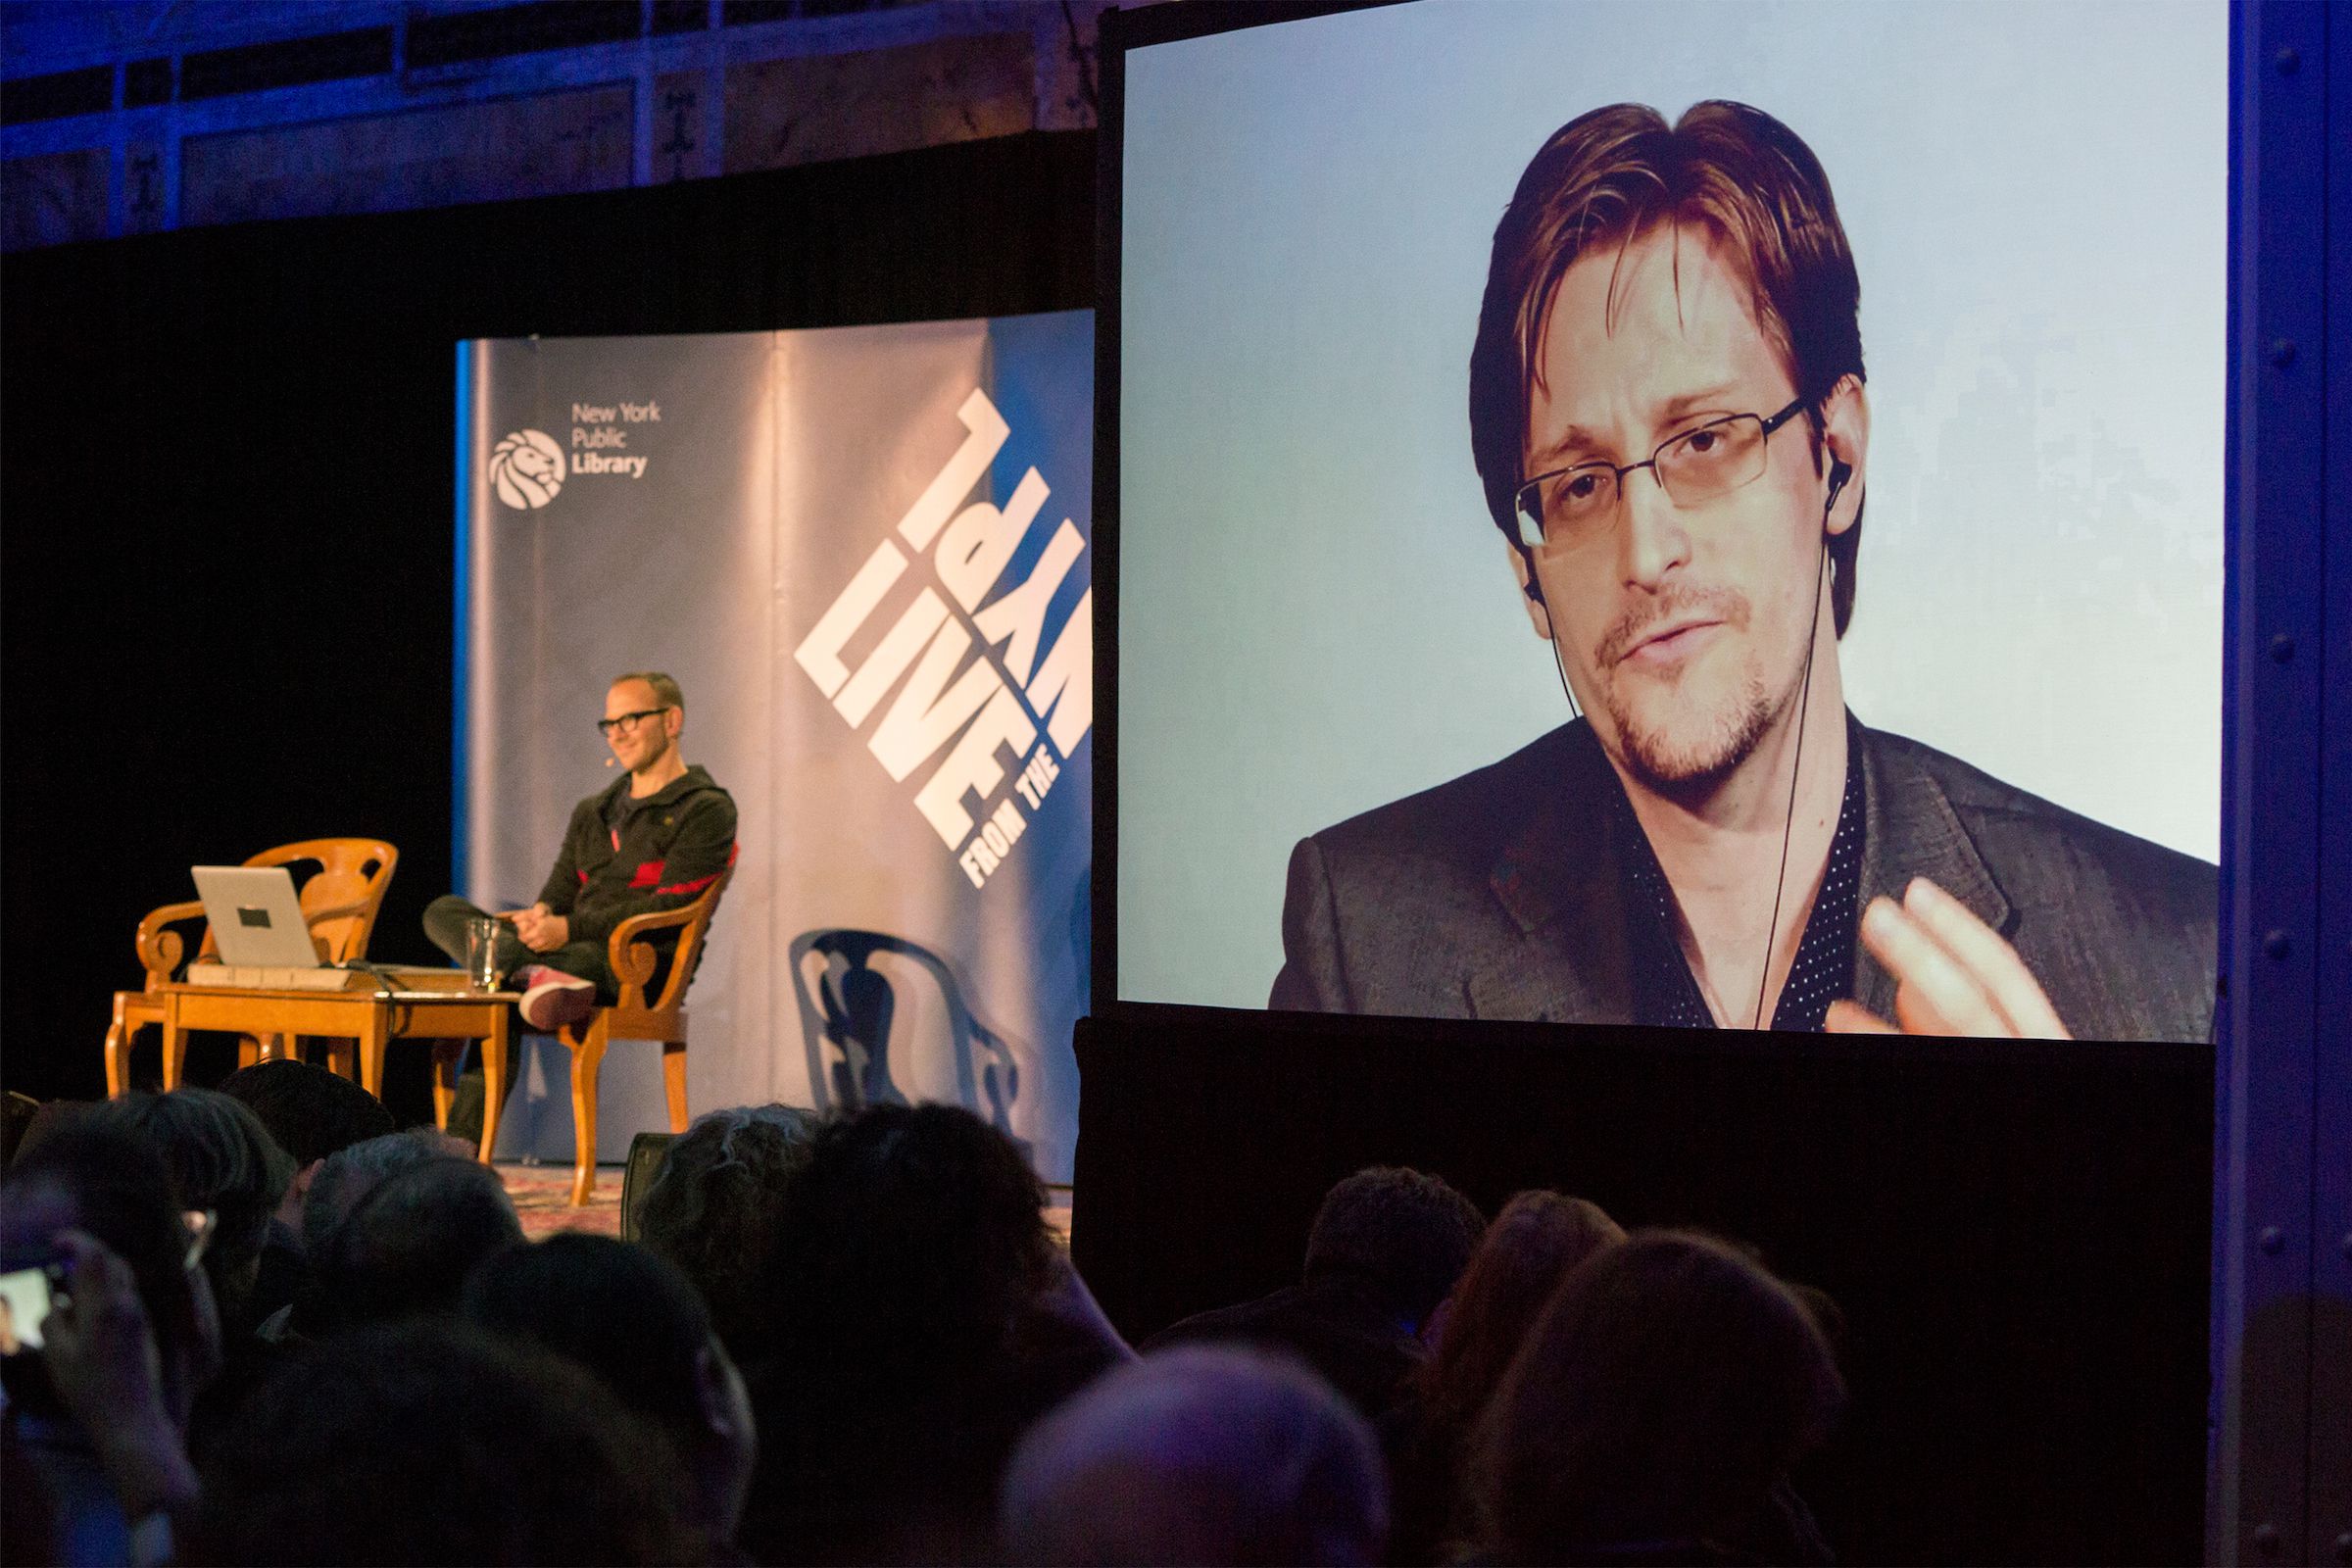 Cory Doctorow and Edward Snowden